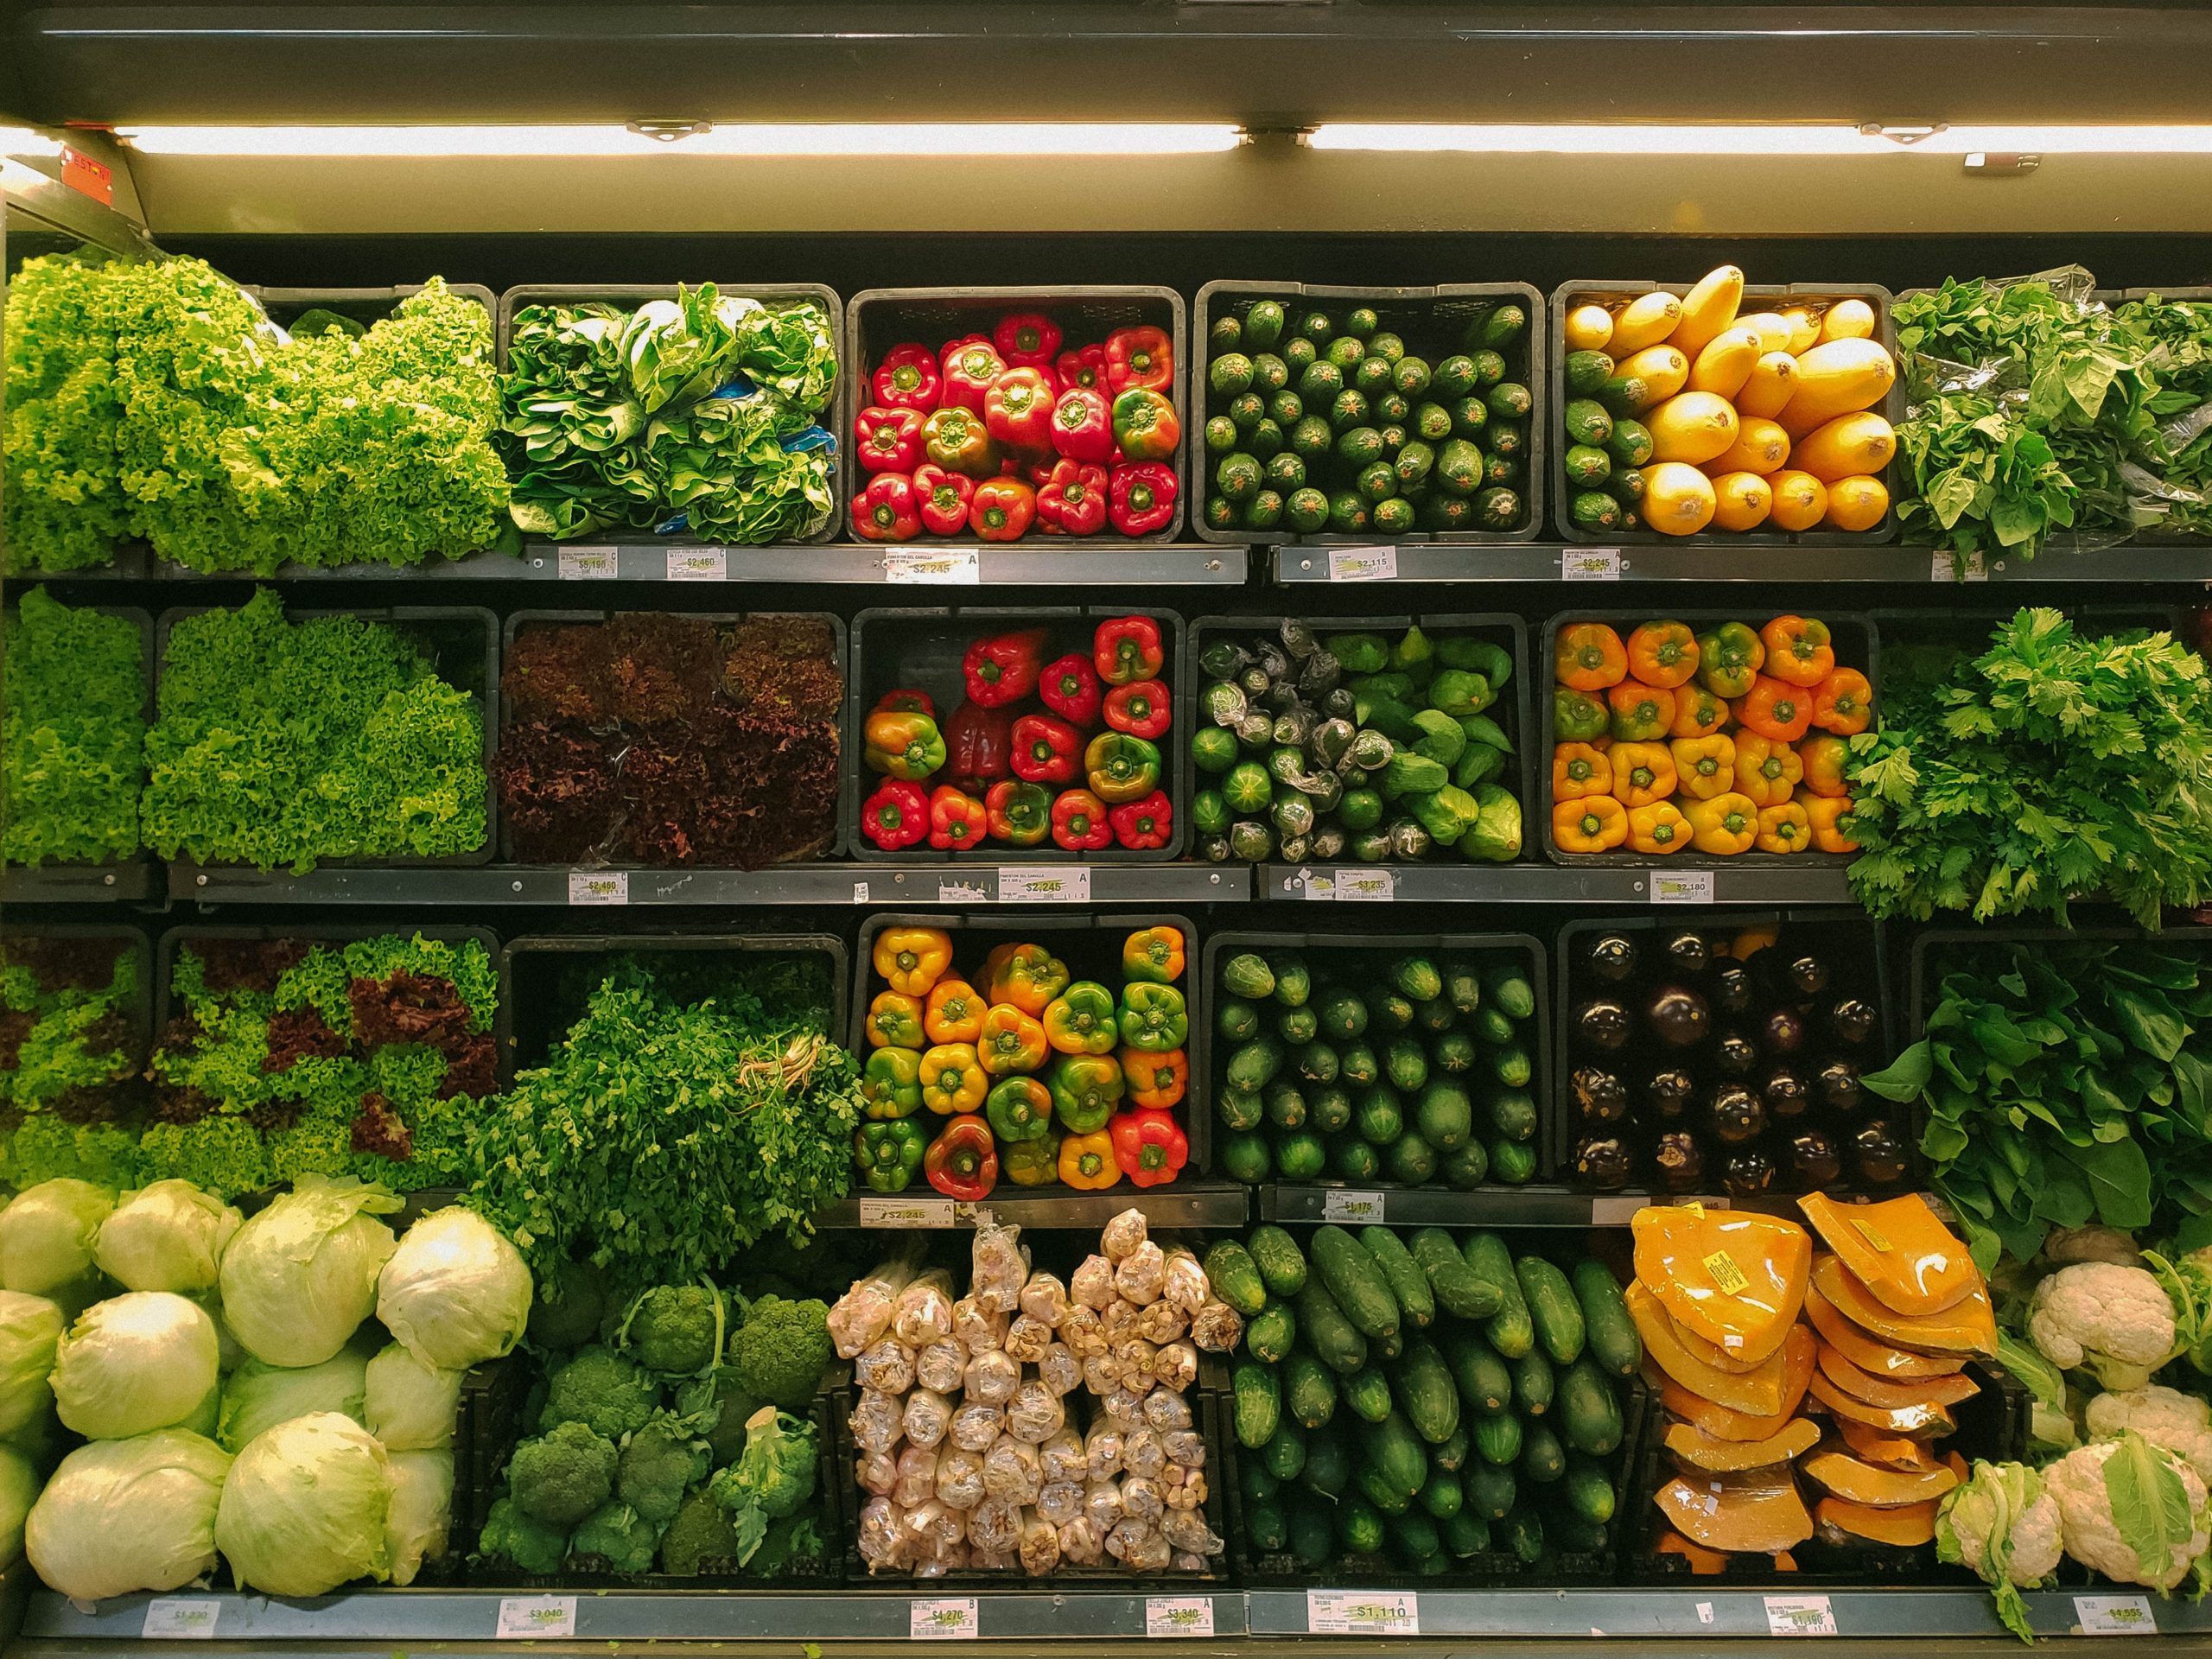 Produce shelf at grocery store